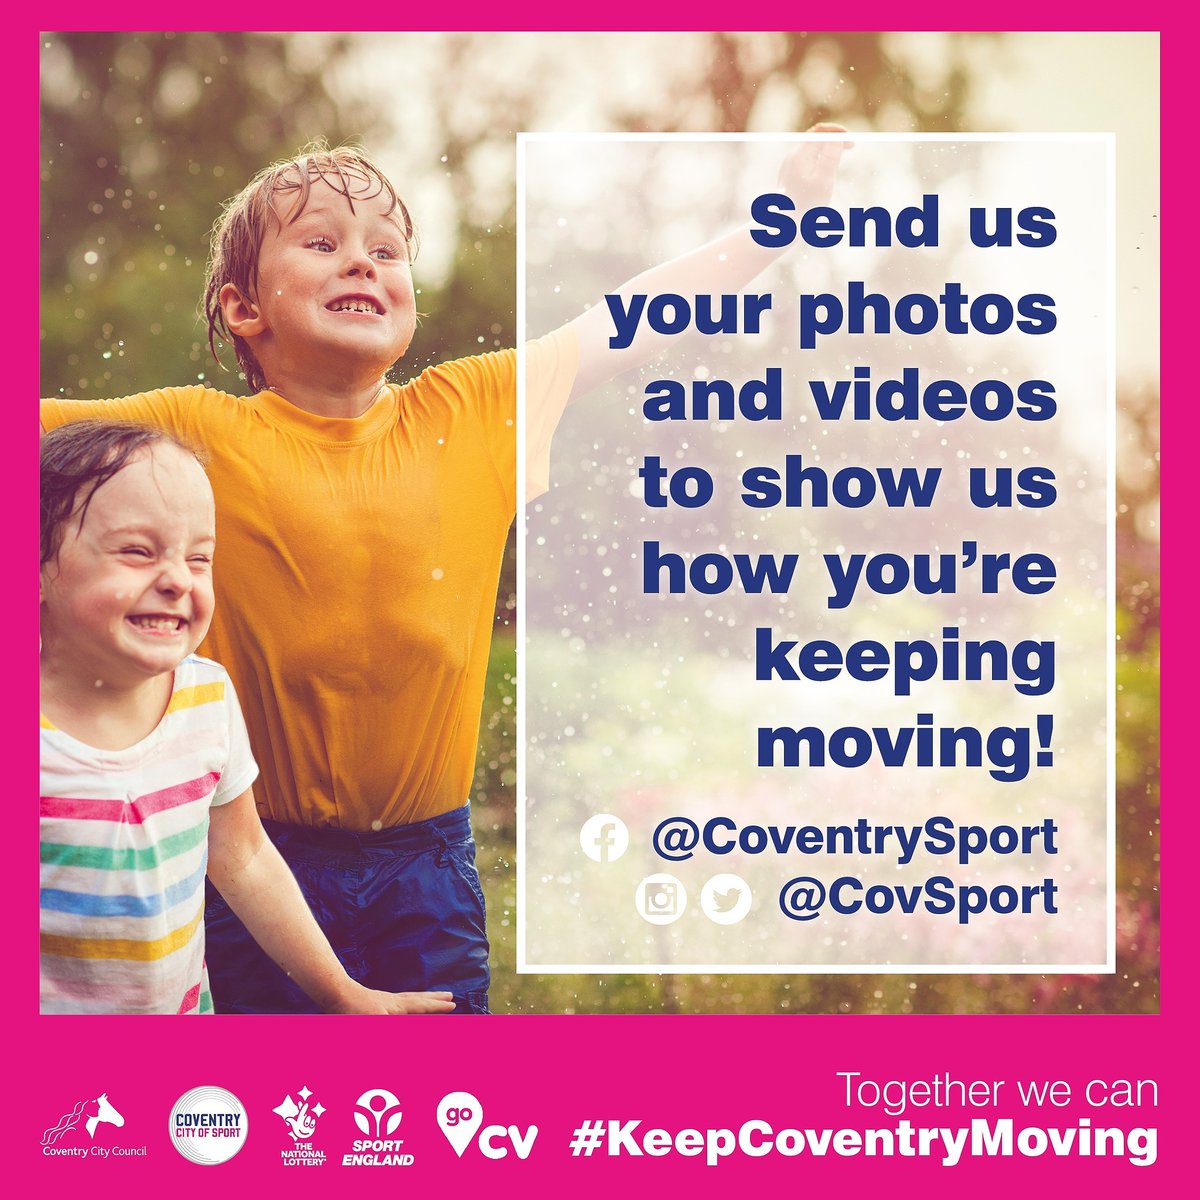 Happy Friday everyone! It's been a great week with an exciting announcement! Enjoy your weekend and let's #KeepCoventryMoving 💪🏽 @kamrancaan1